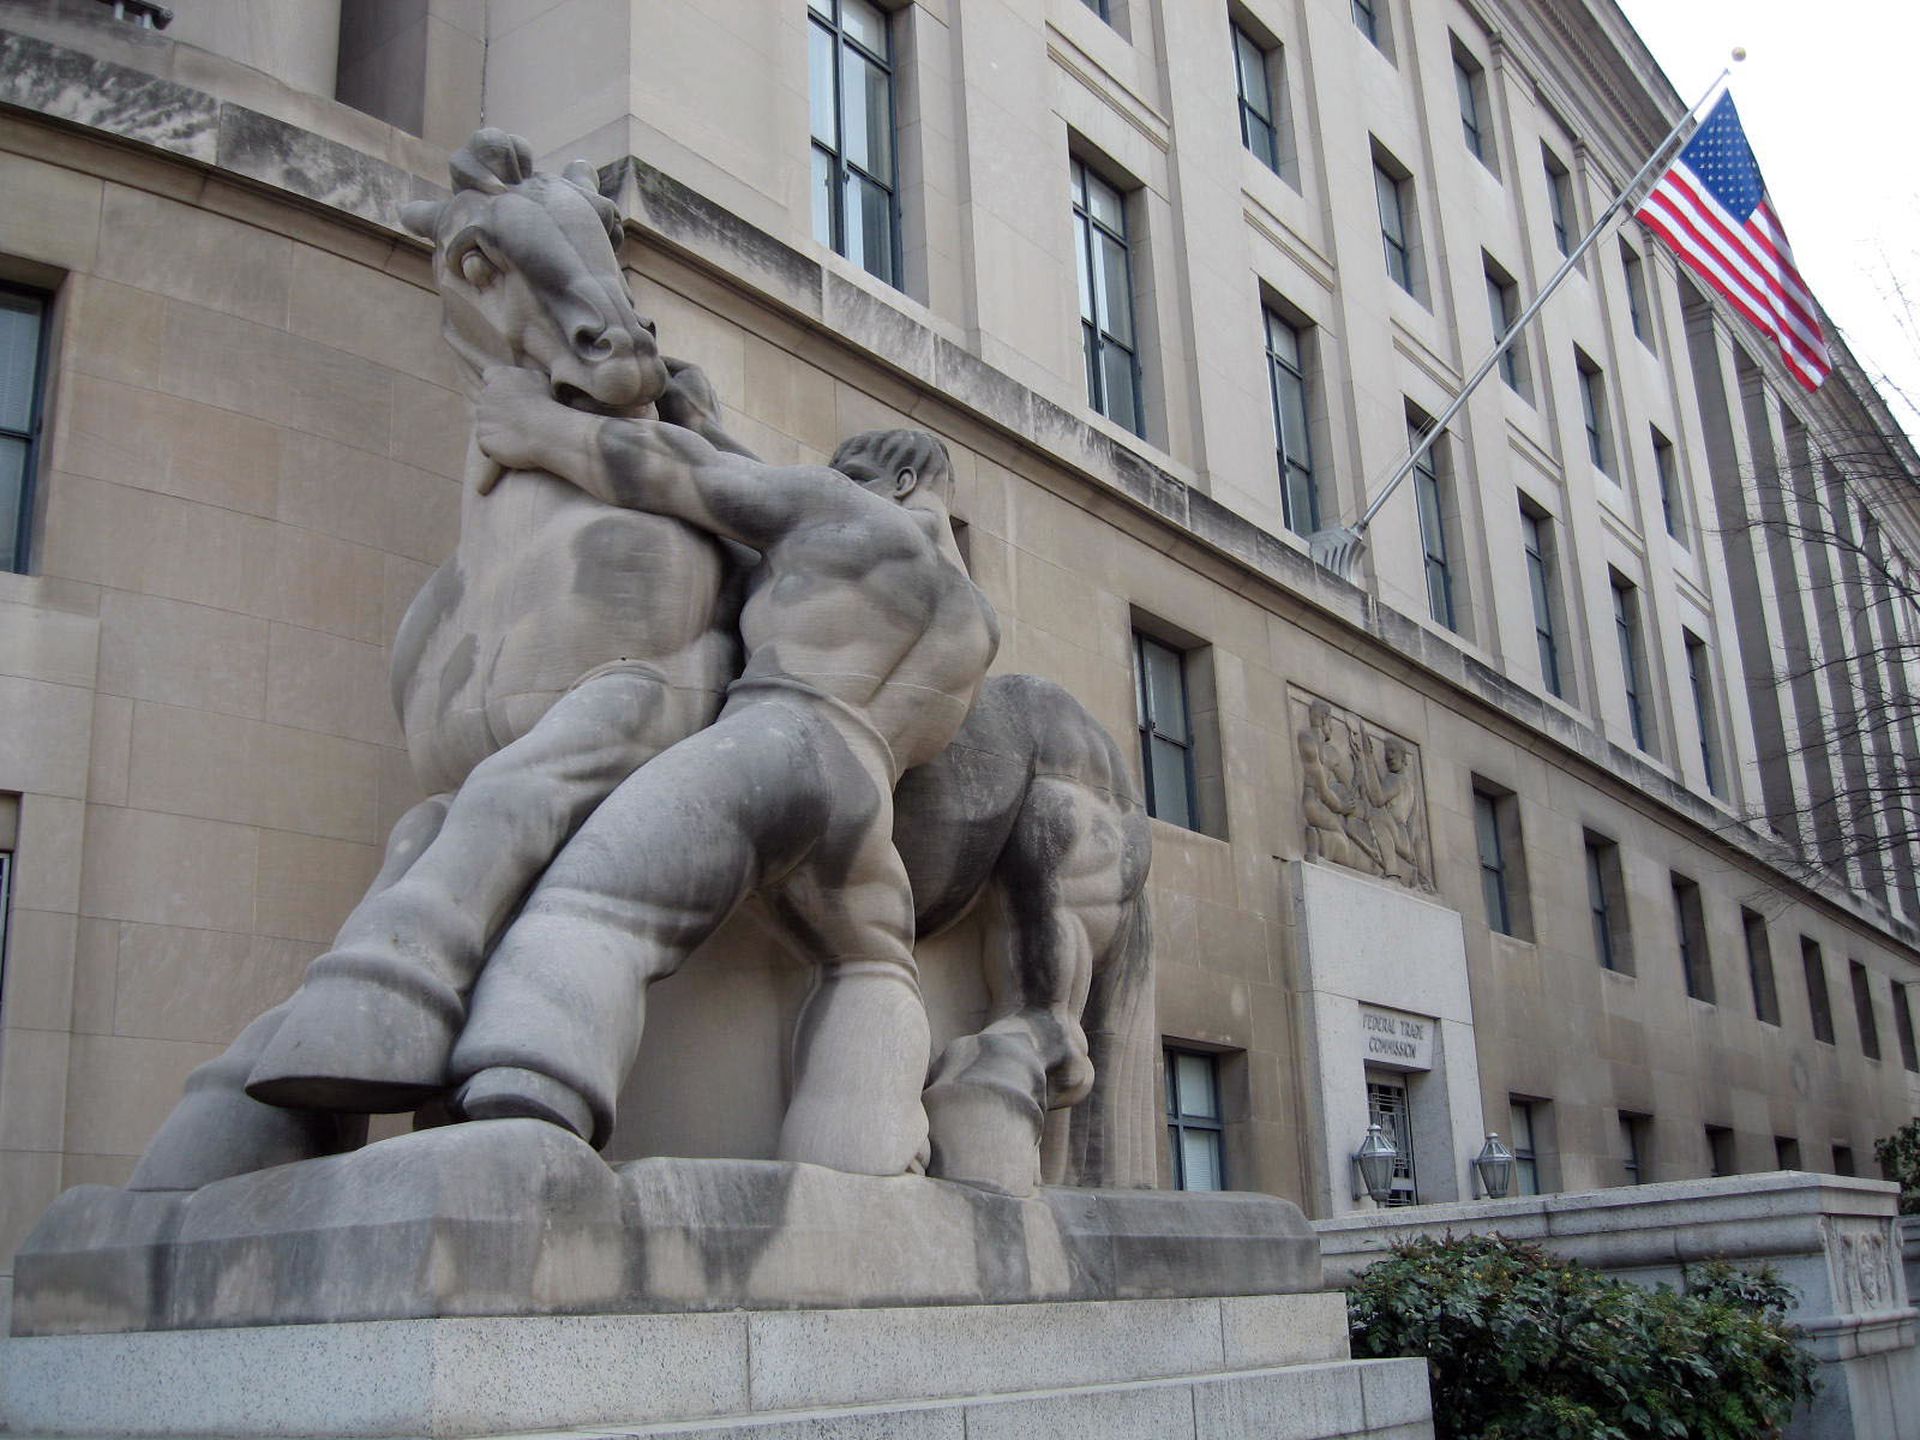 Lawsuits against SuperCare allege that a July 2021 hack led to the exposure in possible violation of FTC and HIPAA regulations. (&#8220;statue at Federal Trade Commission&#8221; by sha in LA is marked with CC BY-NC-ND 2.0.)